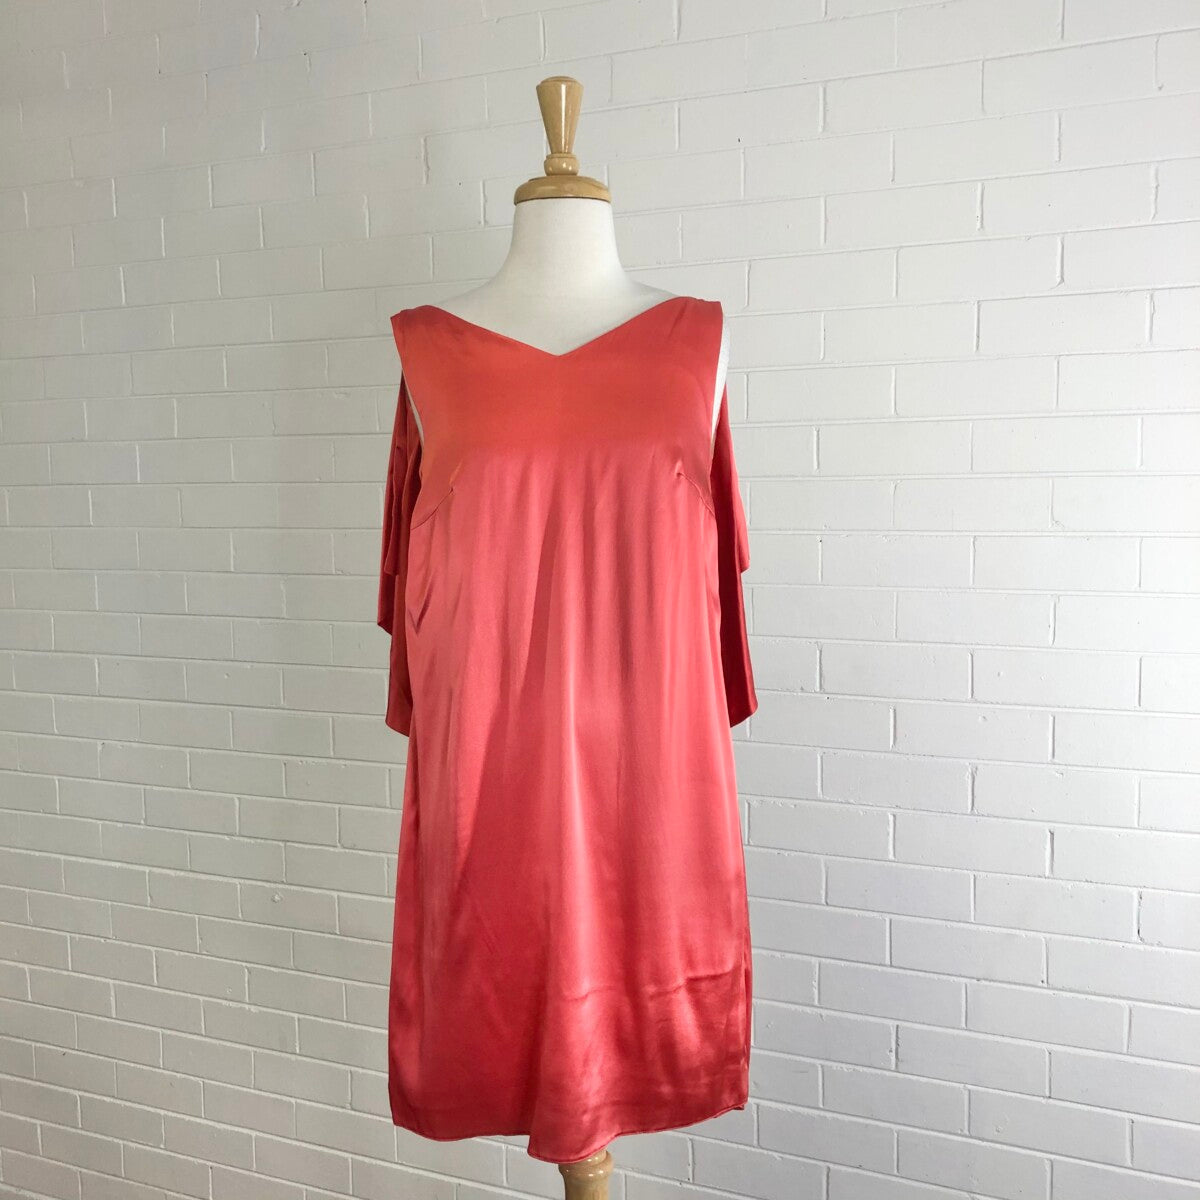 NEBO | Germany | dress | size 10 | knee length | new with tags